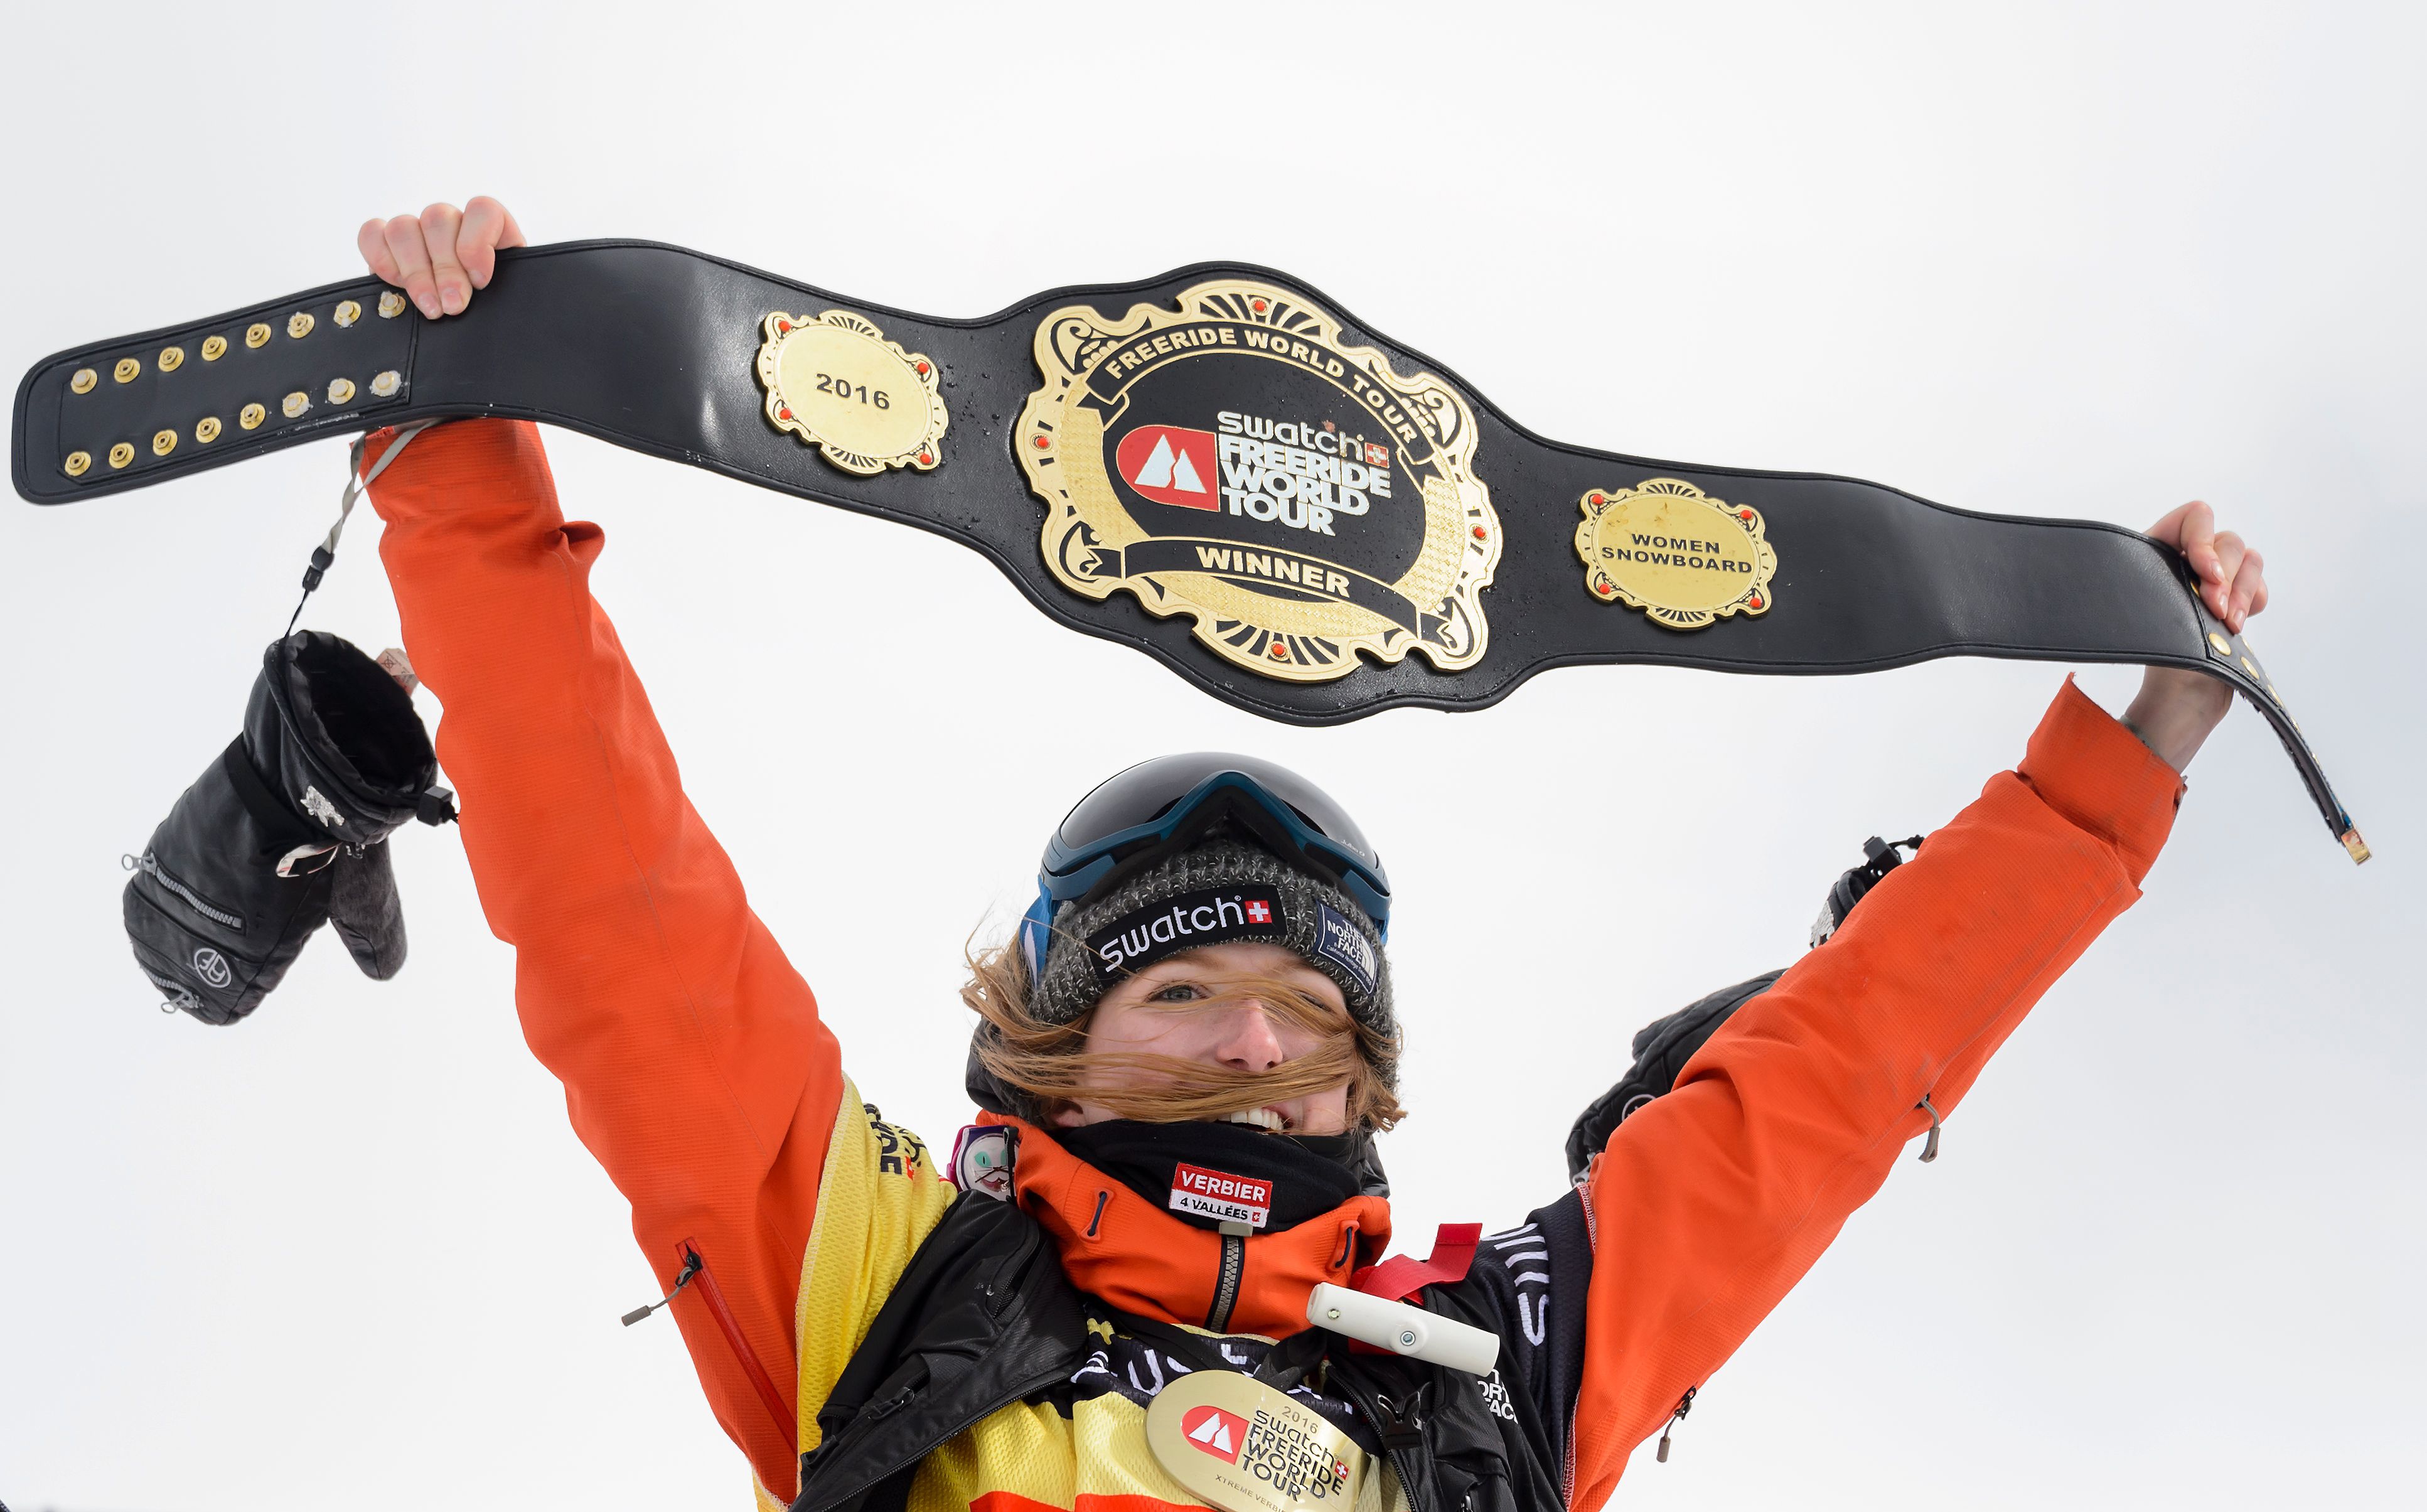 World champion Switzerland's Estelle Balet waves with the overall belt after she won the women's snowboard event at the Bec des Rosses during the Verbier Xtreme Freeride World Tour final on April 2, 2016 above the Swiss Alps resort of Verbier. (Fabrice Coffrini—AFP/Getty Images)